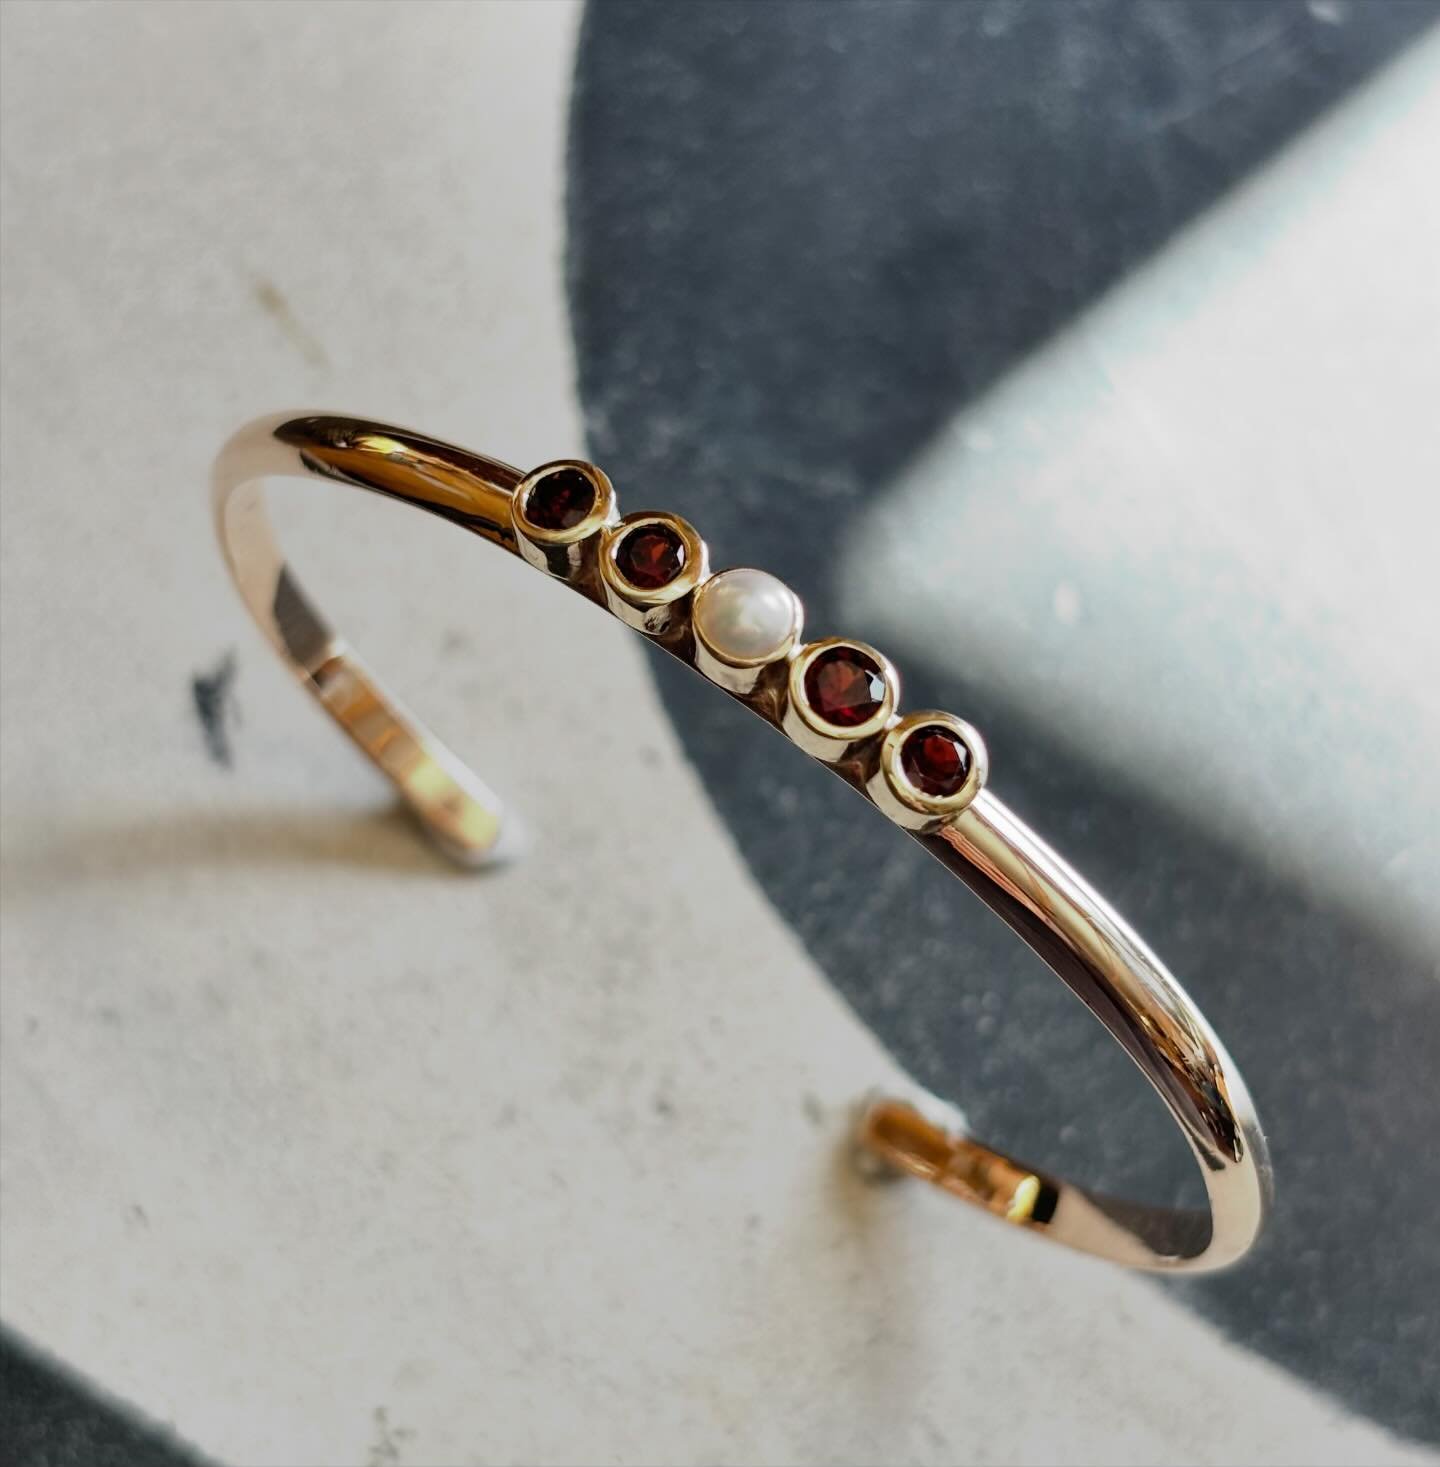 Simple Gold garnet and pearl cuff bangle, made using the customers own gold and stones. I think having a gold bangle is the ultimate treat!
#newfromold #jewelleryremodel #goldbangle #madefromscratch #madeinscotland #etsyseller #garnetsandgold